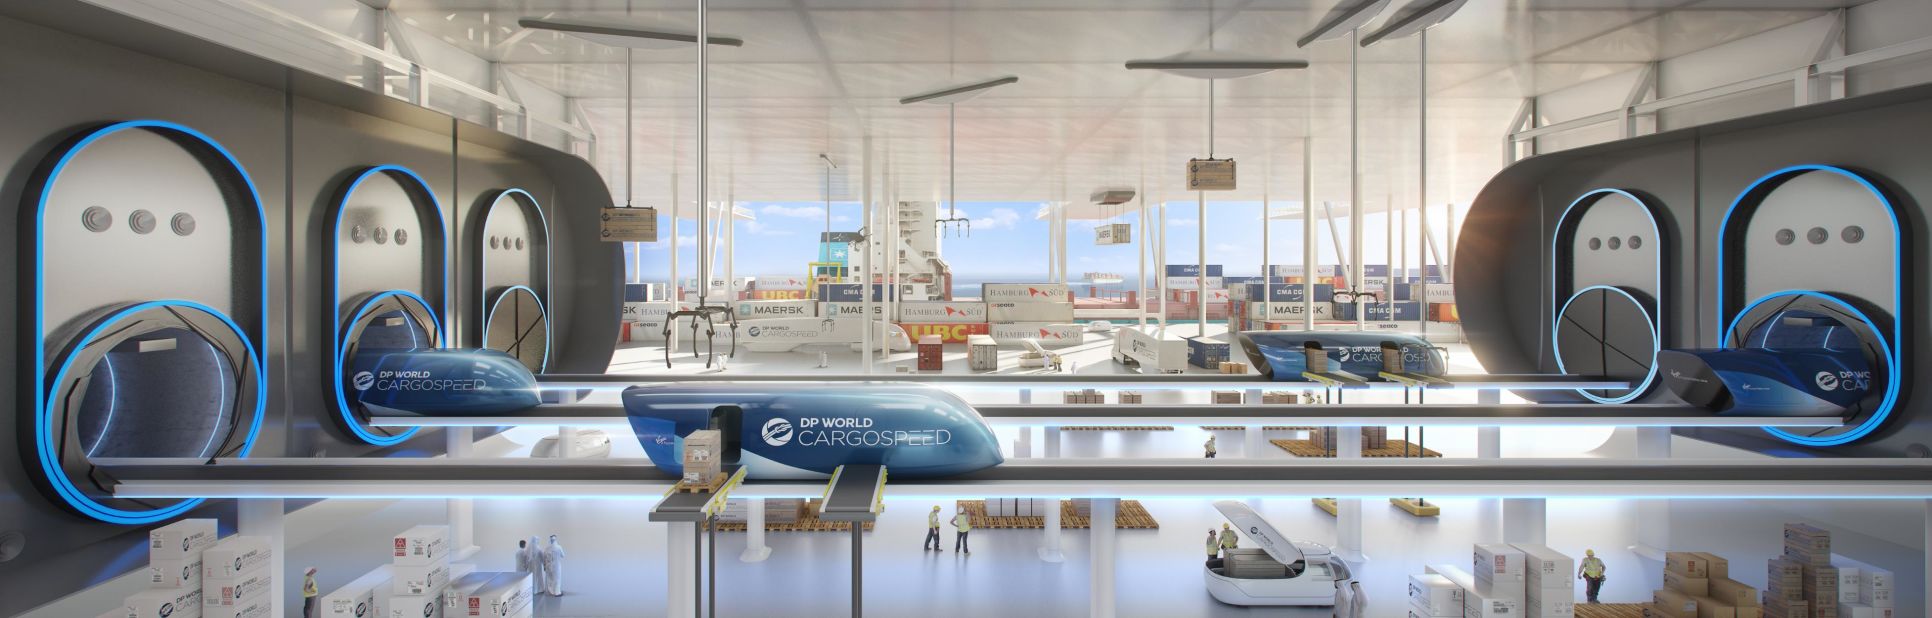 DP World Cargospeed, a collaboration between Virgin Hyperloop One and supply chain firm DP World, was recently announced in Dubai. Utilizing magnetic levitation technology, it hopes to move freight -- and people -- at over 600 mph, reducing delivery times and cutting the cost of goods transportation.<br /><br /><strong><em>Scroll through the gallery to discover more about the transport revolution sweeping Dubai.</em></strong>